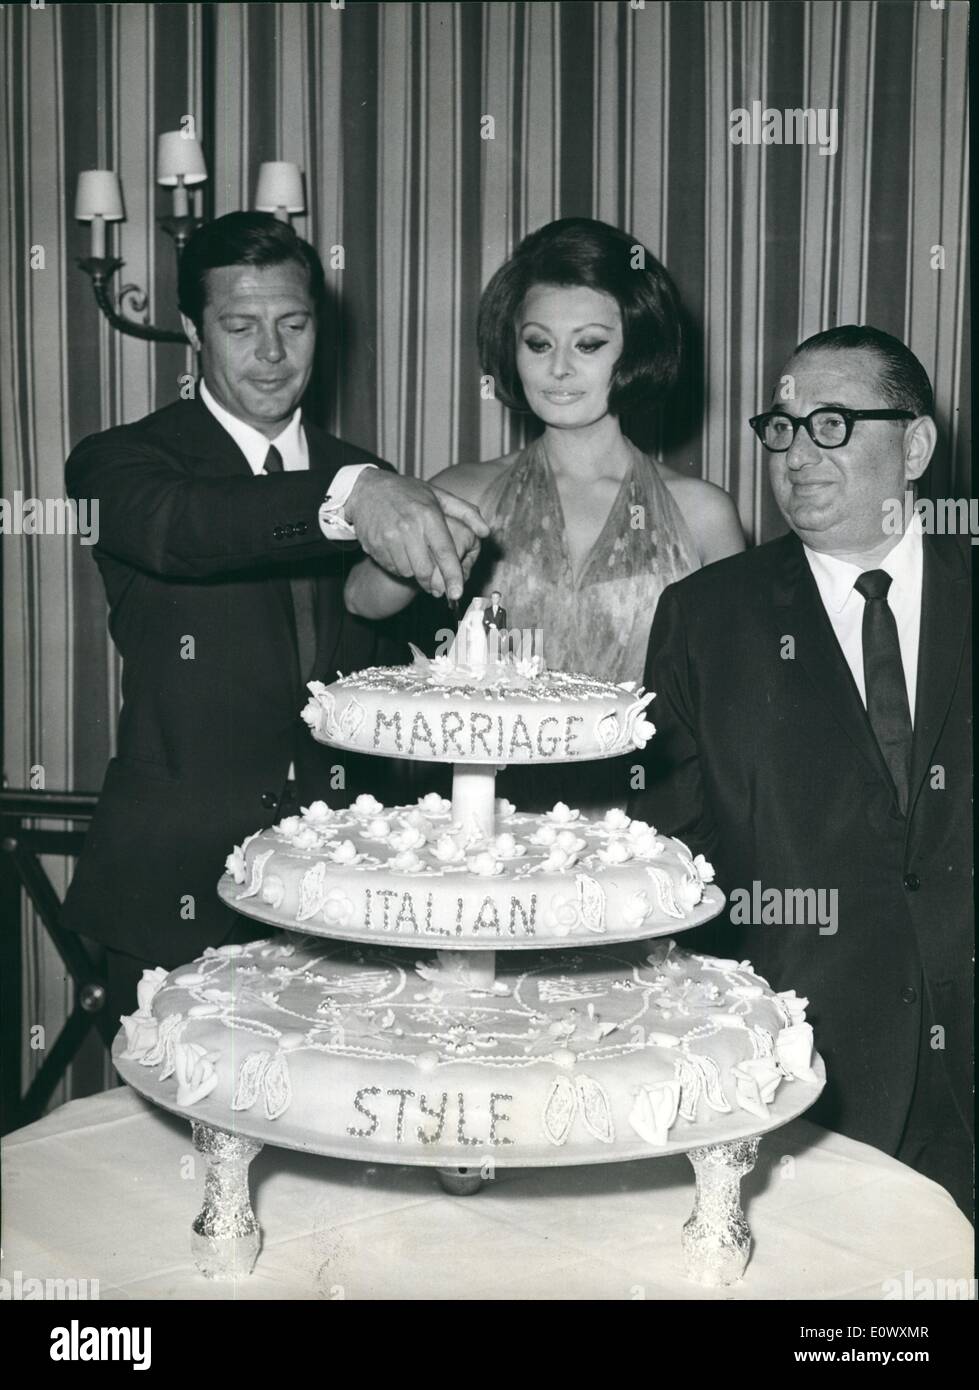 Jun. 06, 1964 - Sophia Loren and Marcello Mastroianno the principal actors in ''Marriage Italian style'' attended the press conference, producer Joseph E. Levine held in a Roman hotel to illustrate, besides the above said film, also his plans regarding movies production in the future. Stock Photo